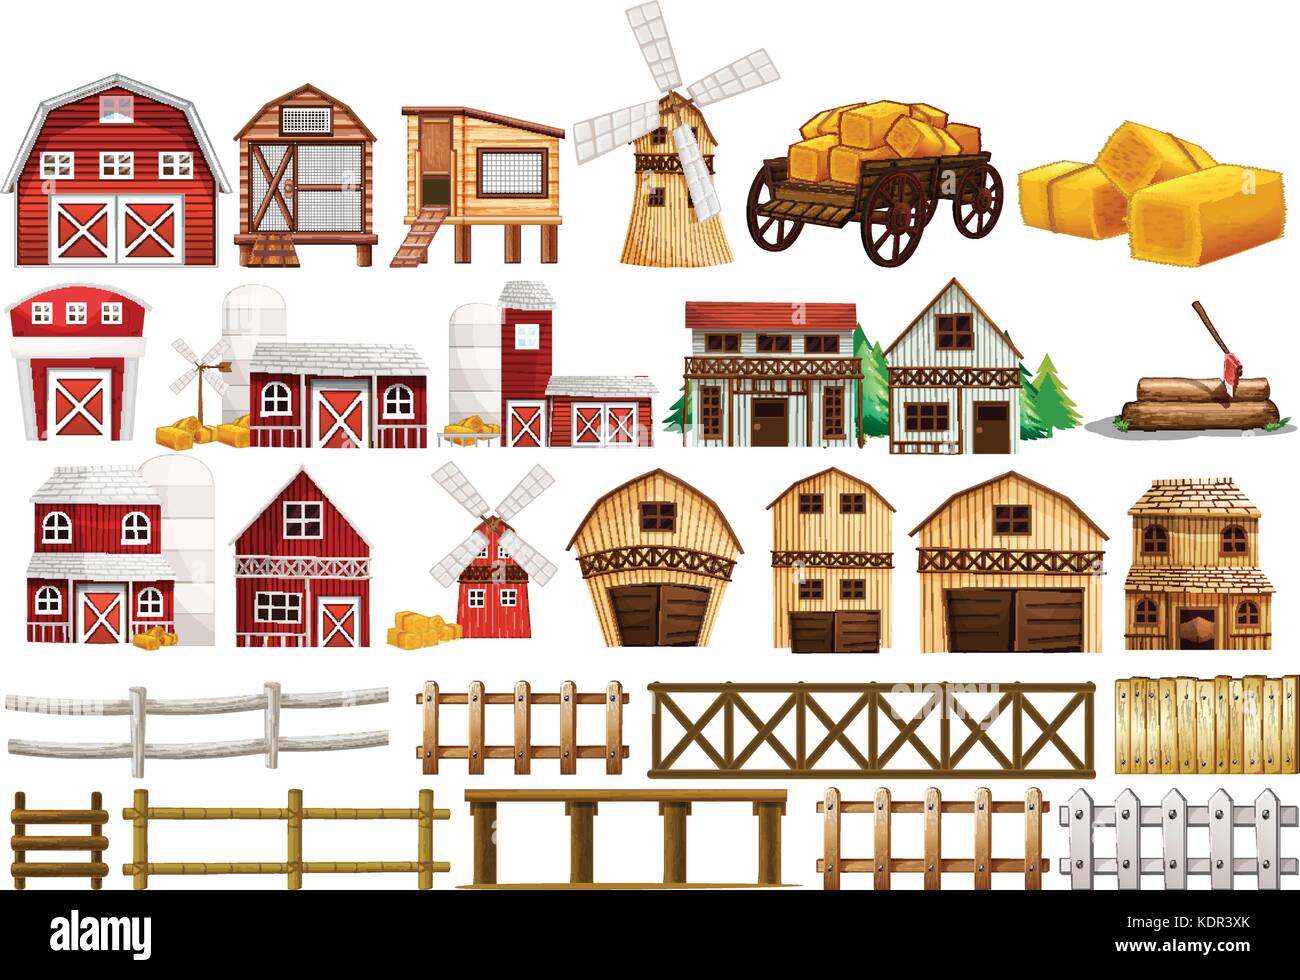 Different design of barns and fences illustration Stock Vector